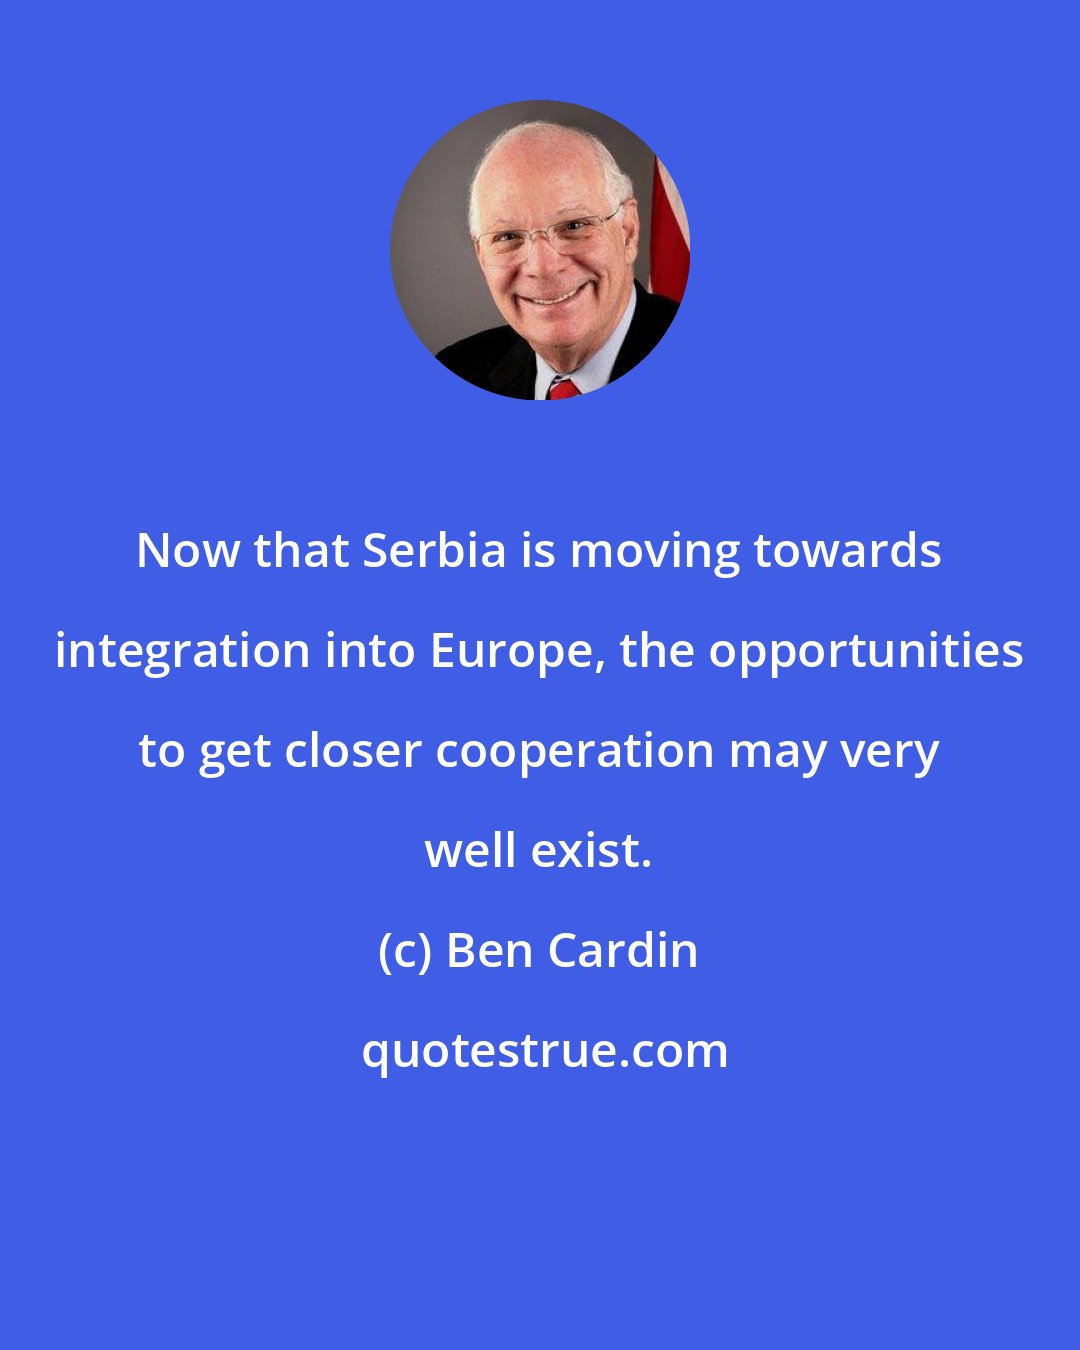 Ben Cardin: Now that Serbia is moving towards integration into Europe, the opportunities to get closer cooperation may very well exist.